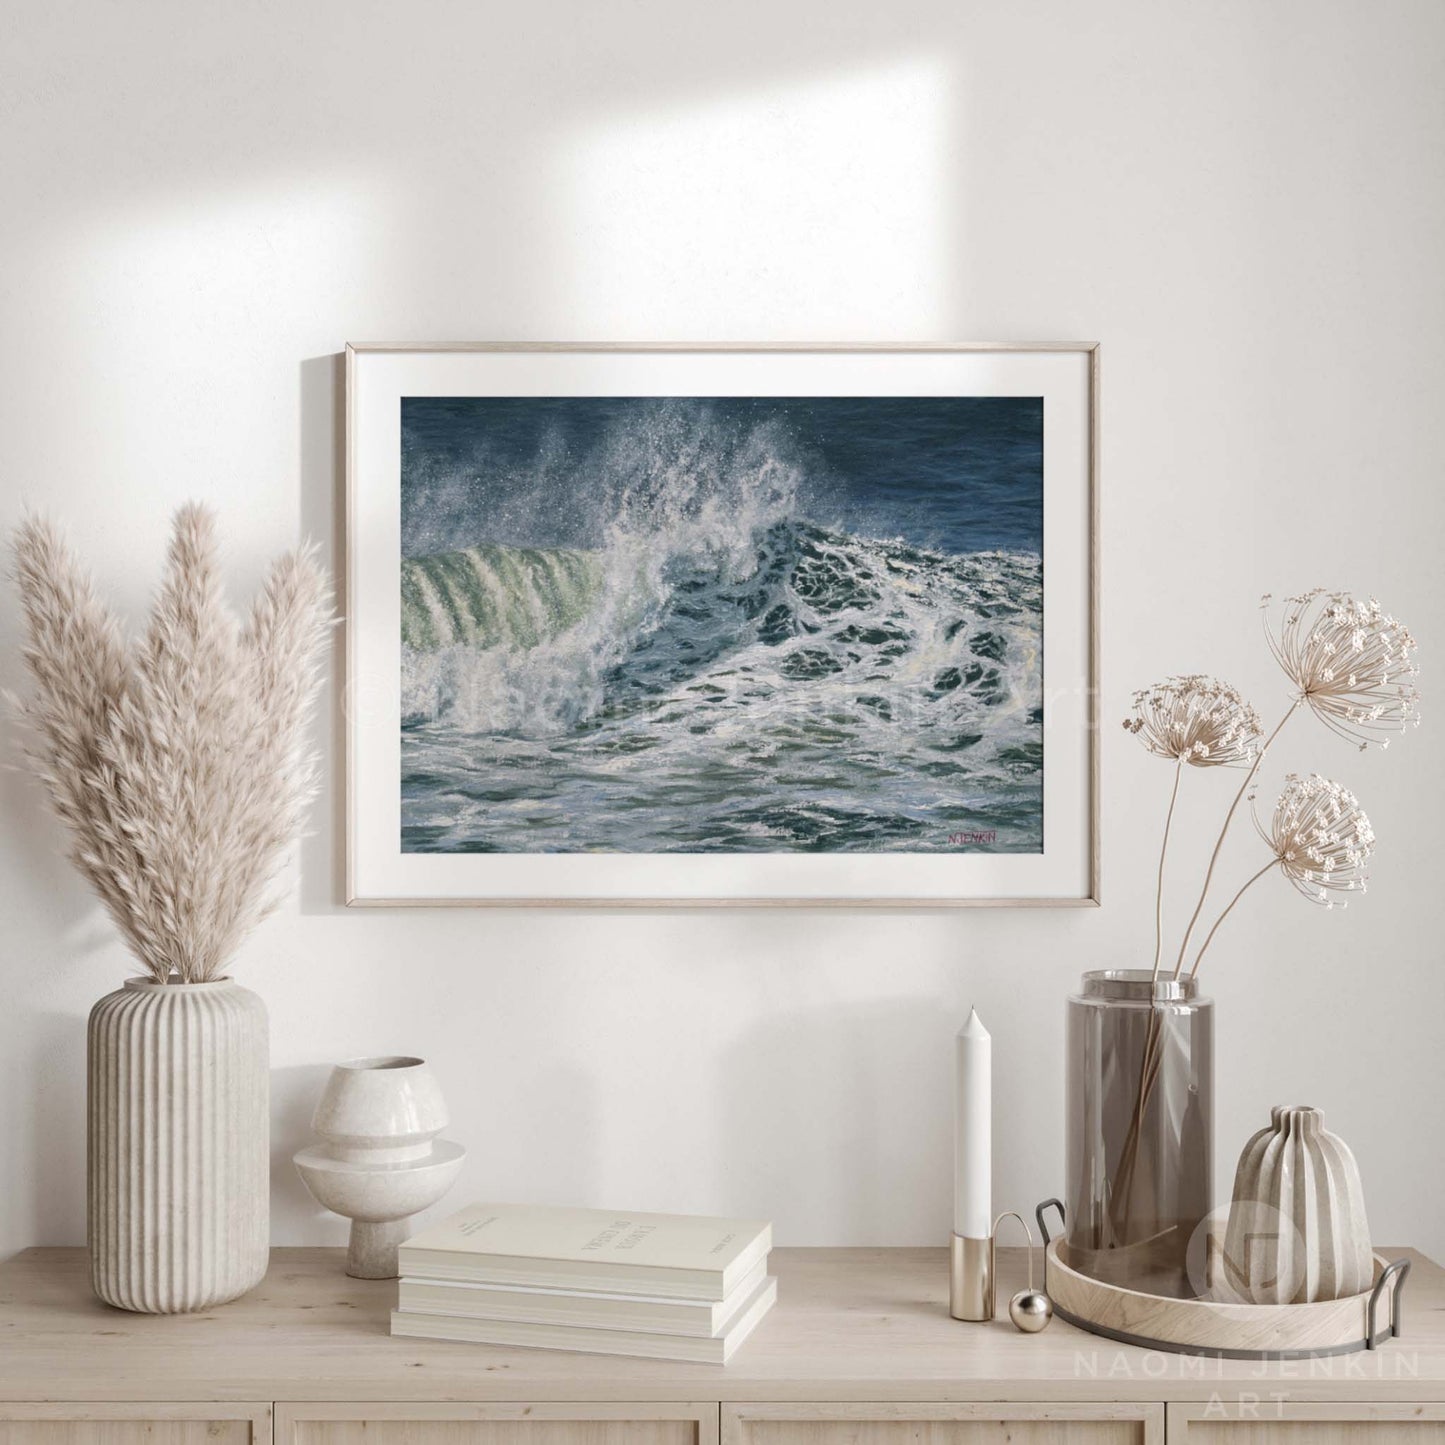 "Froth and Spray” – Seascape Art Prints